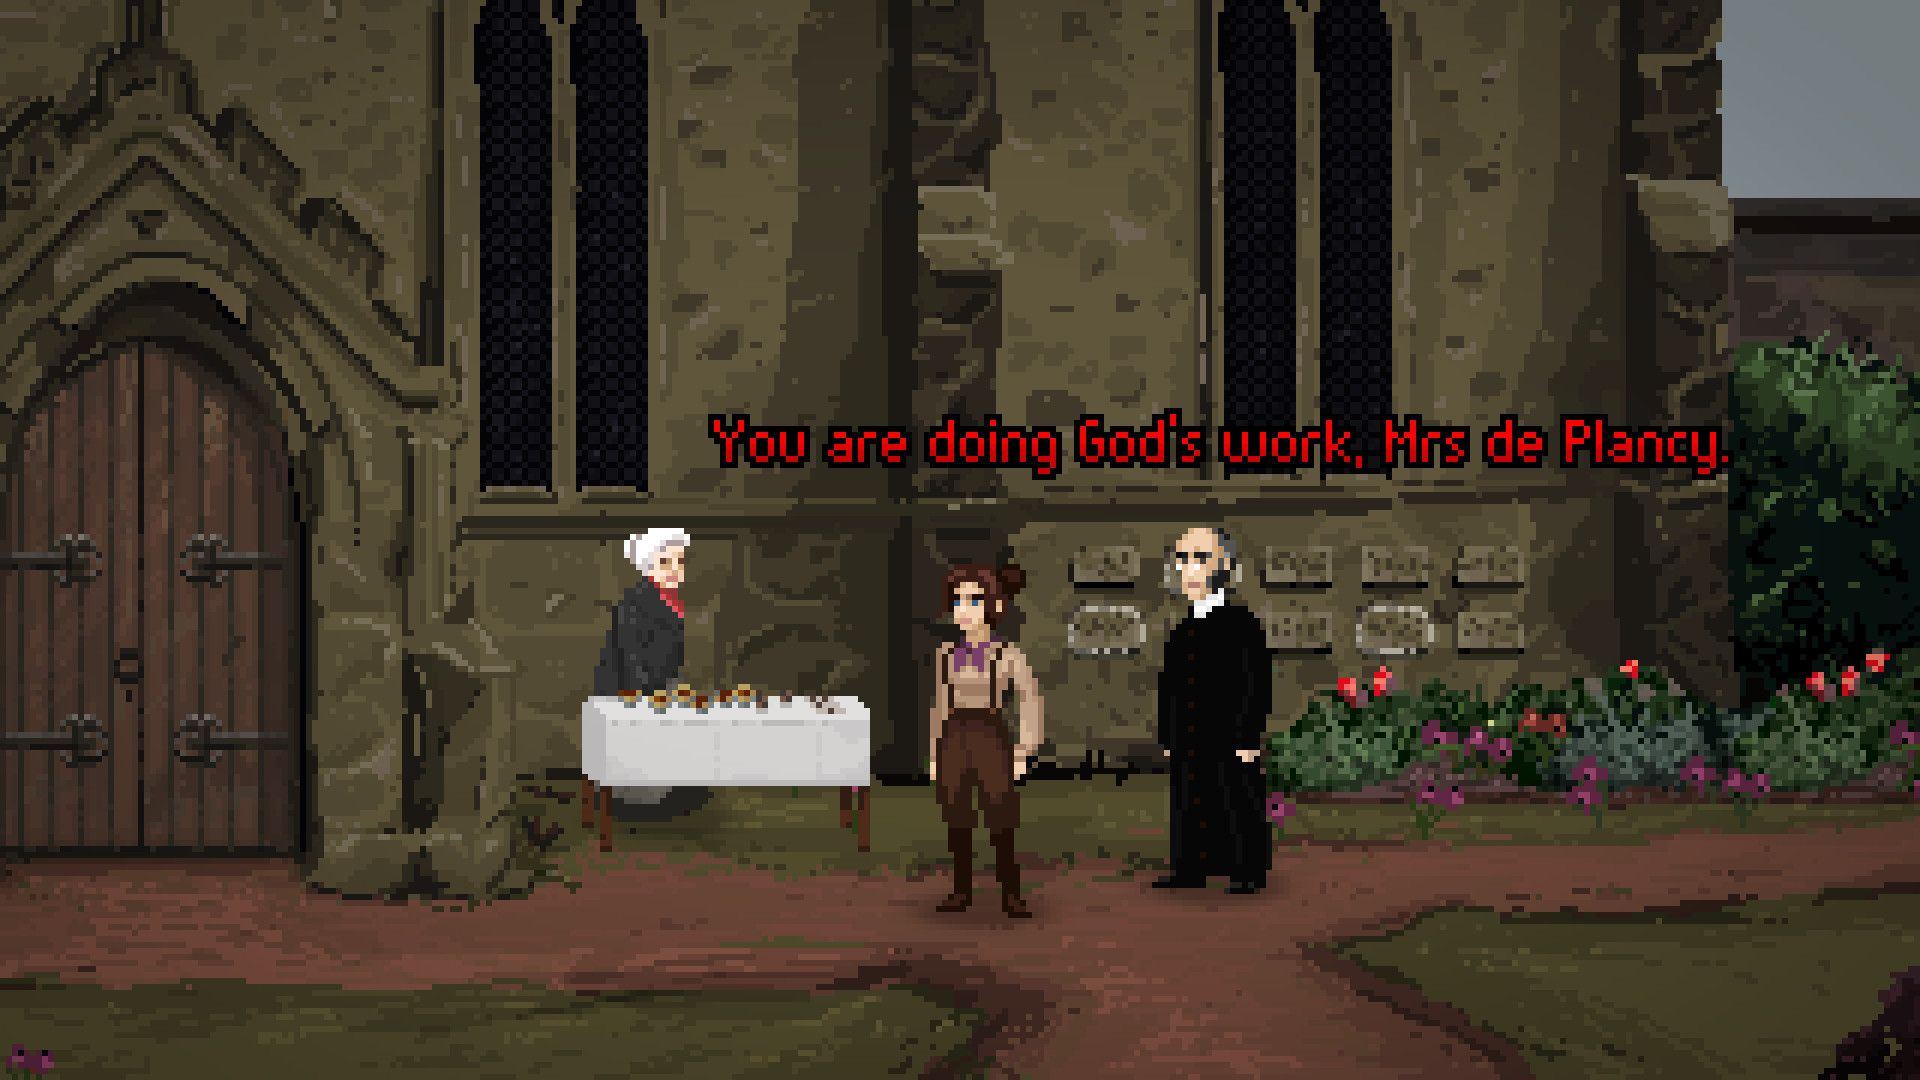 The main character in The Excavation Of Hob's Barrow, Thomasina, stands in front of a church door with a minister.  He says to an elderly woman who runs a cake stand by the door, 